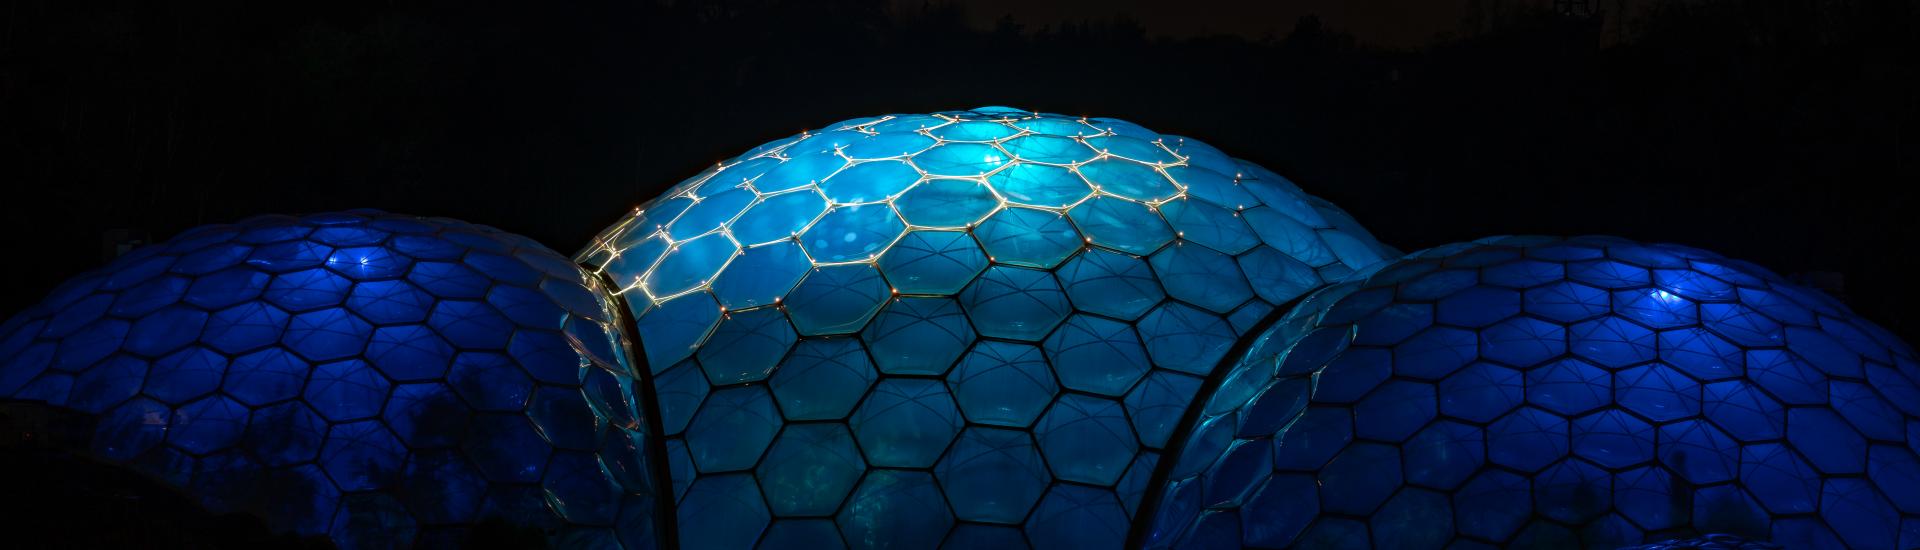 Eden Project Biomes lit at night